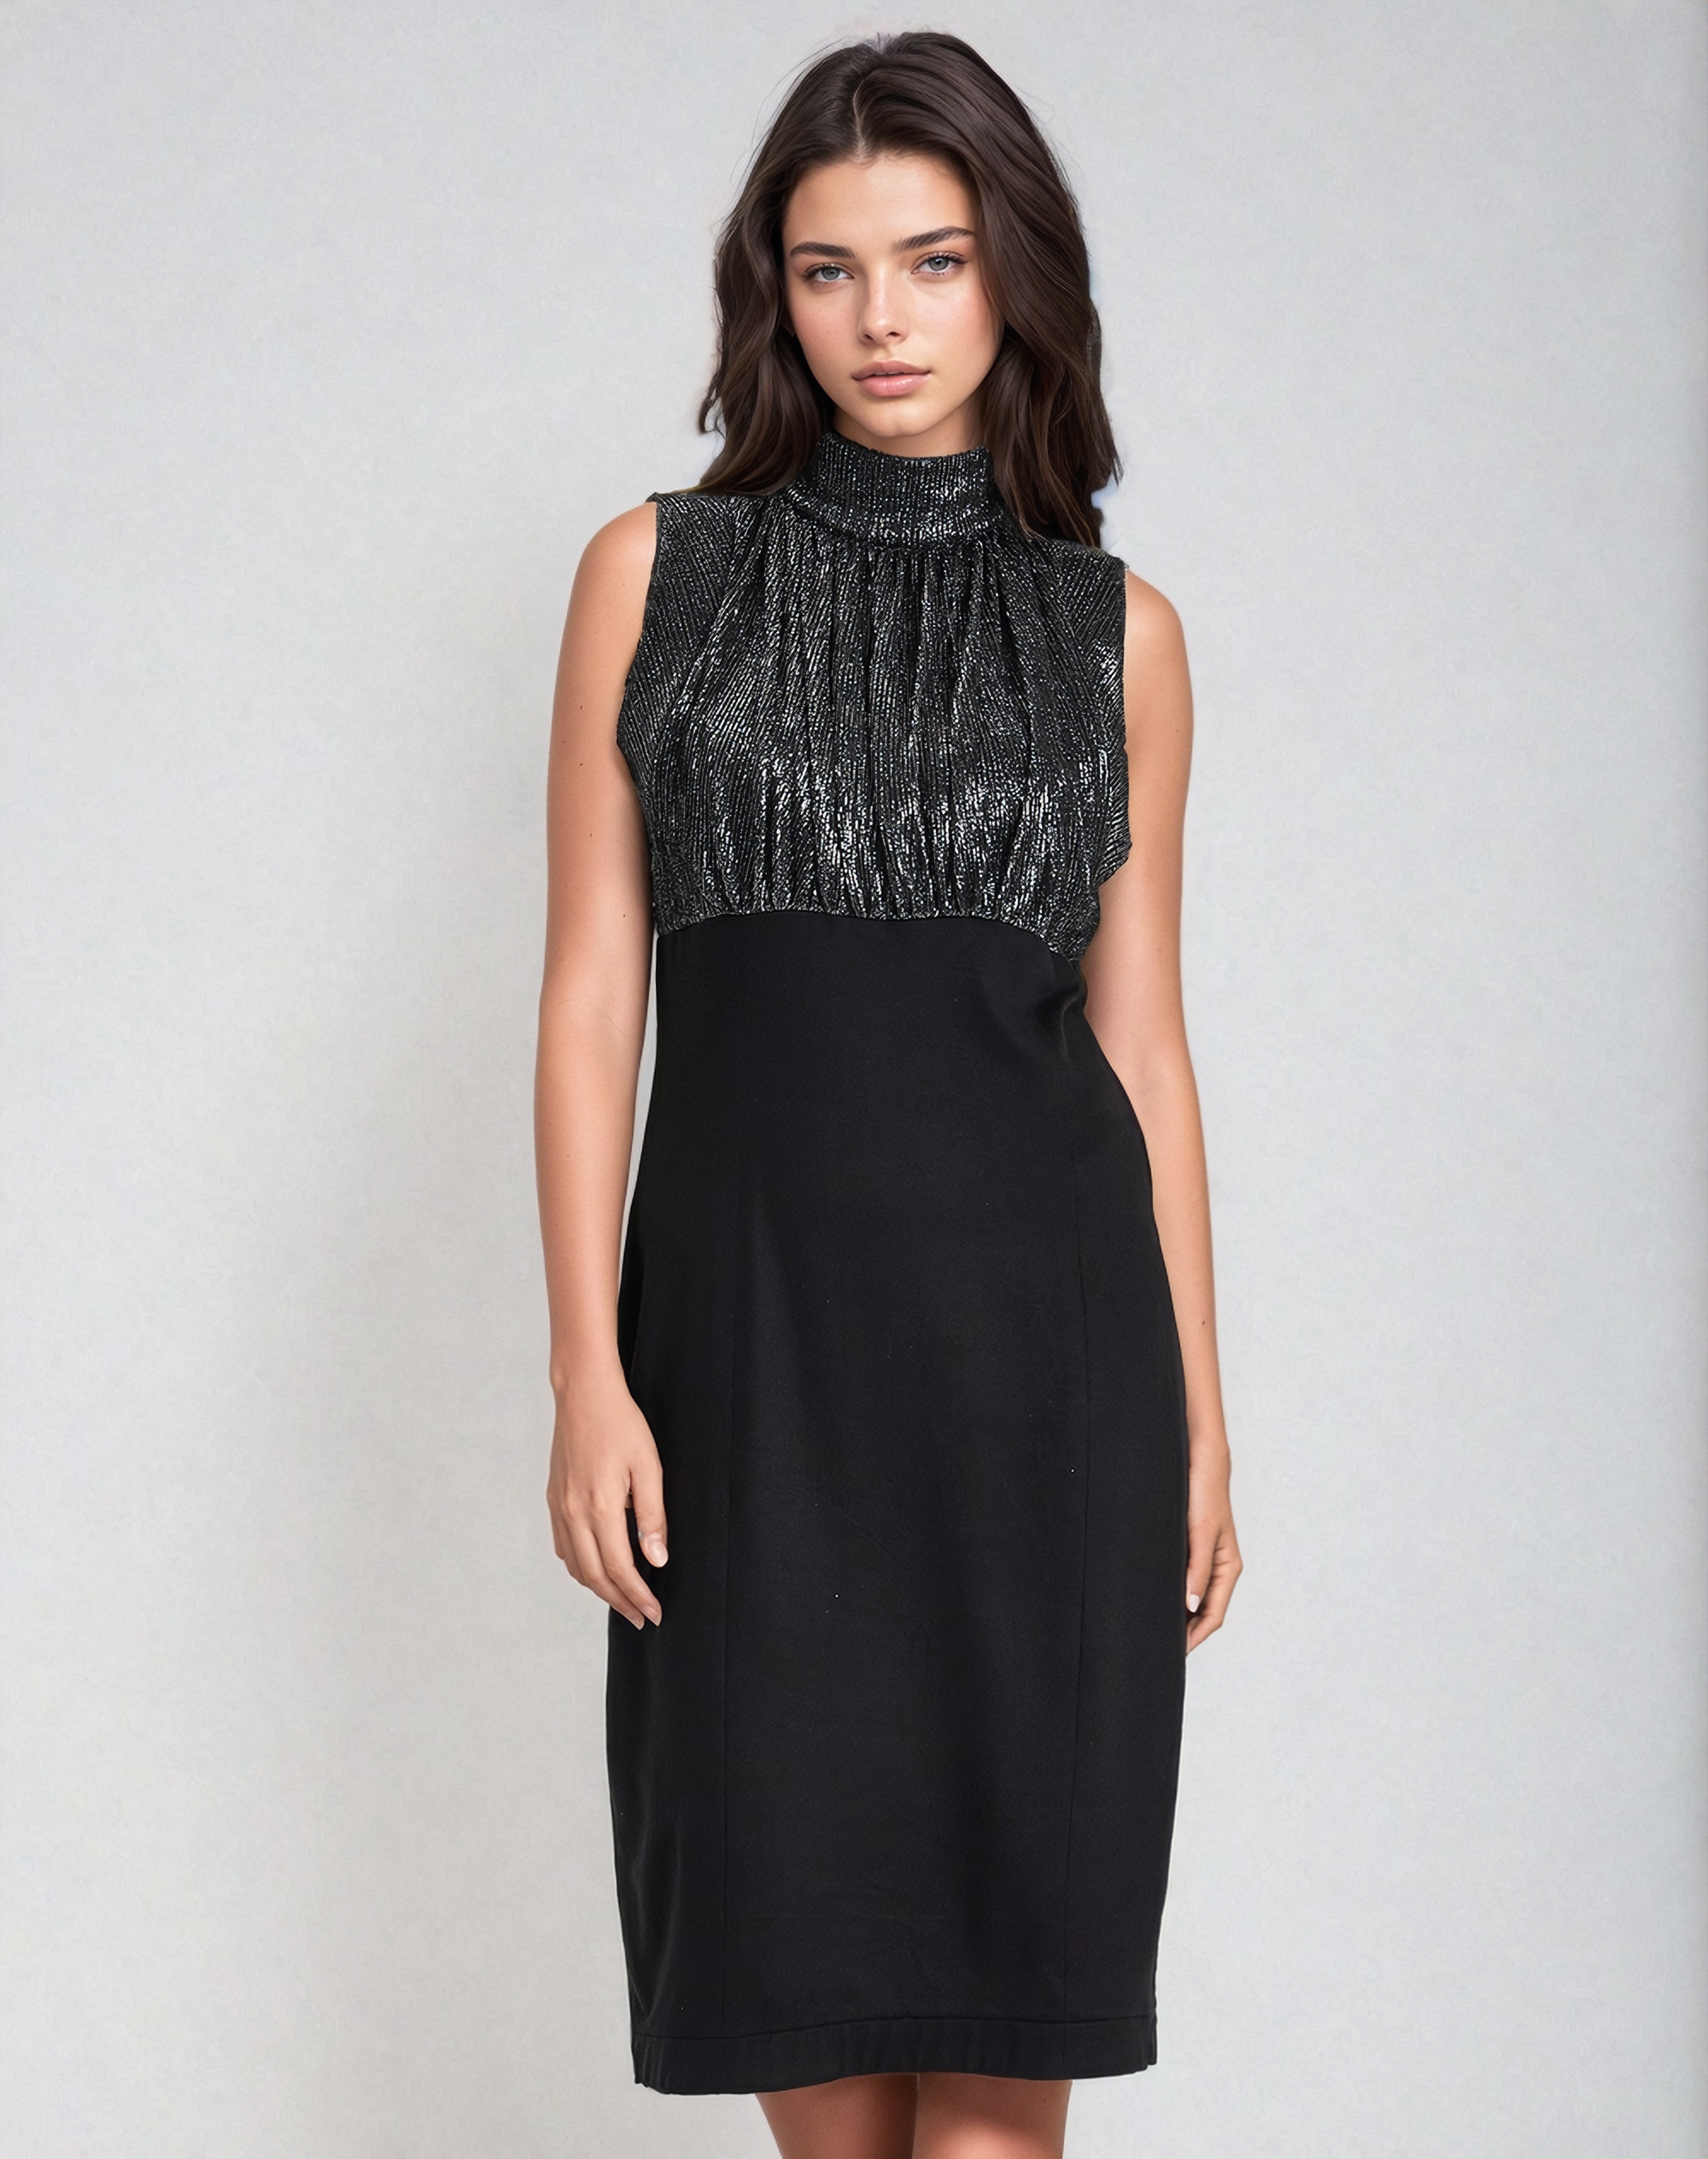 Sleeveless Dress with Fitted Elegance, Voluminous Top, and Alluring Details